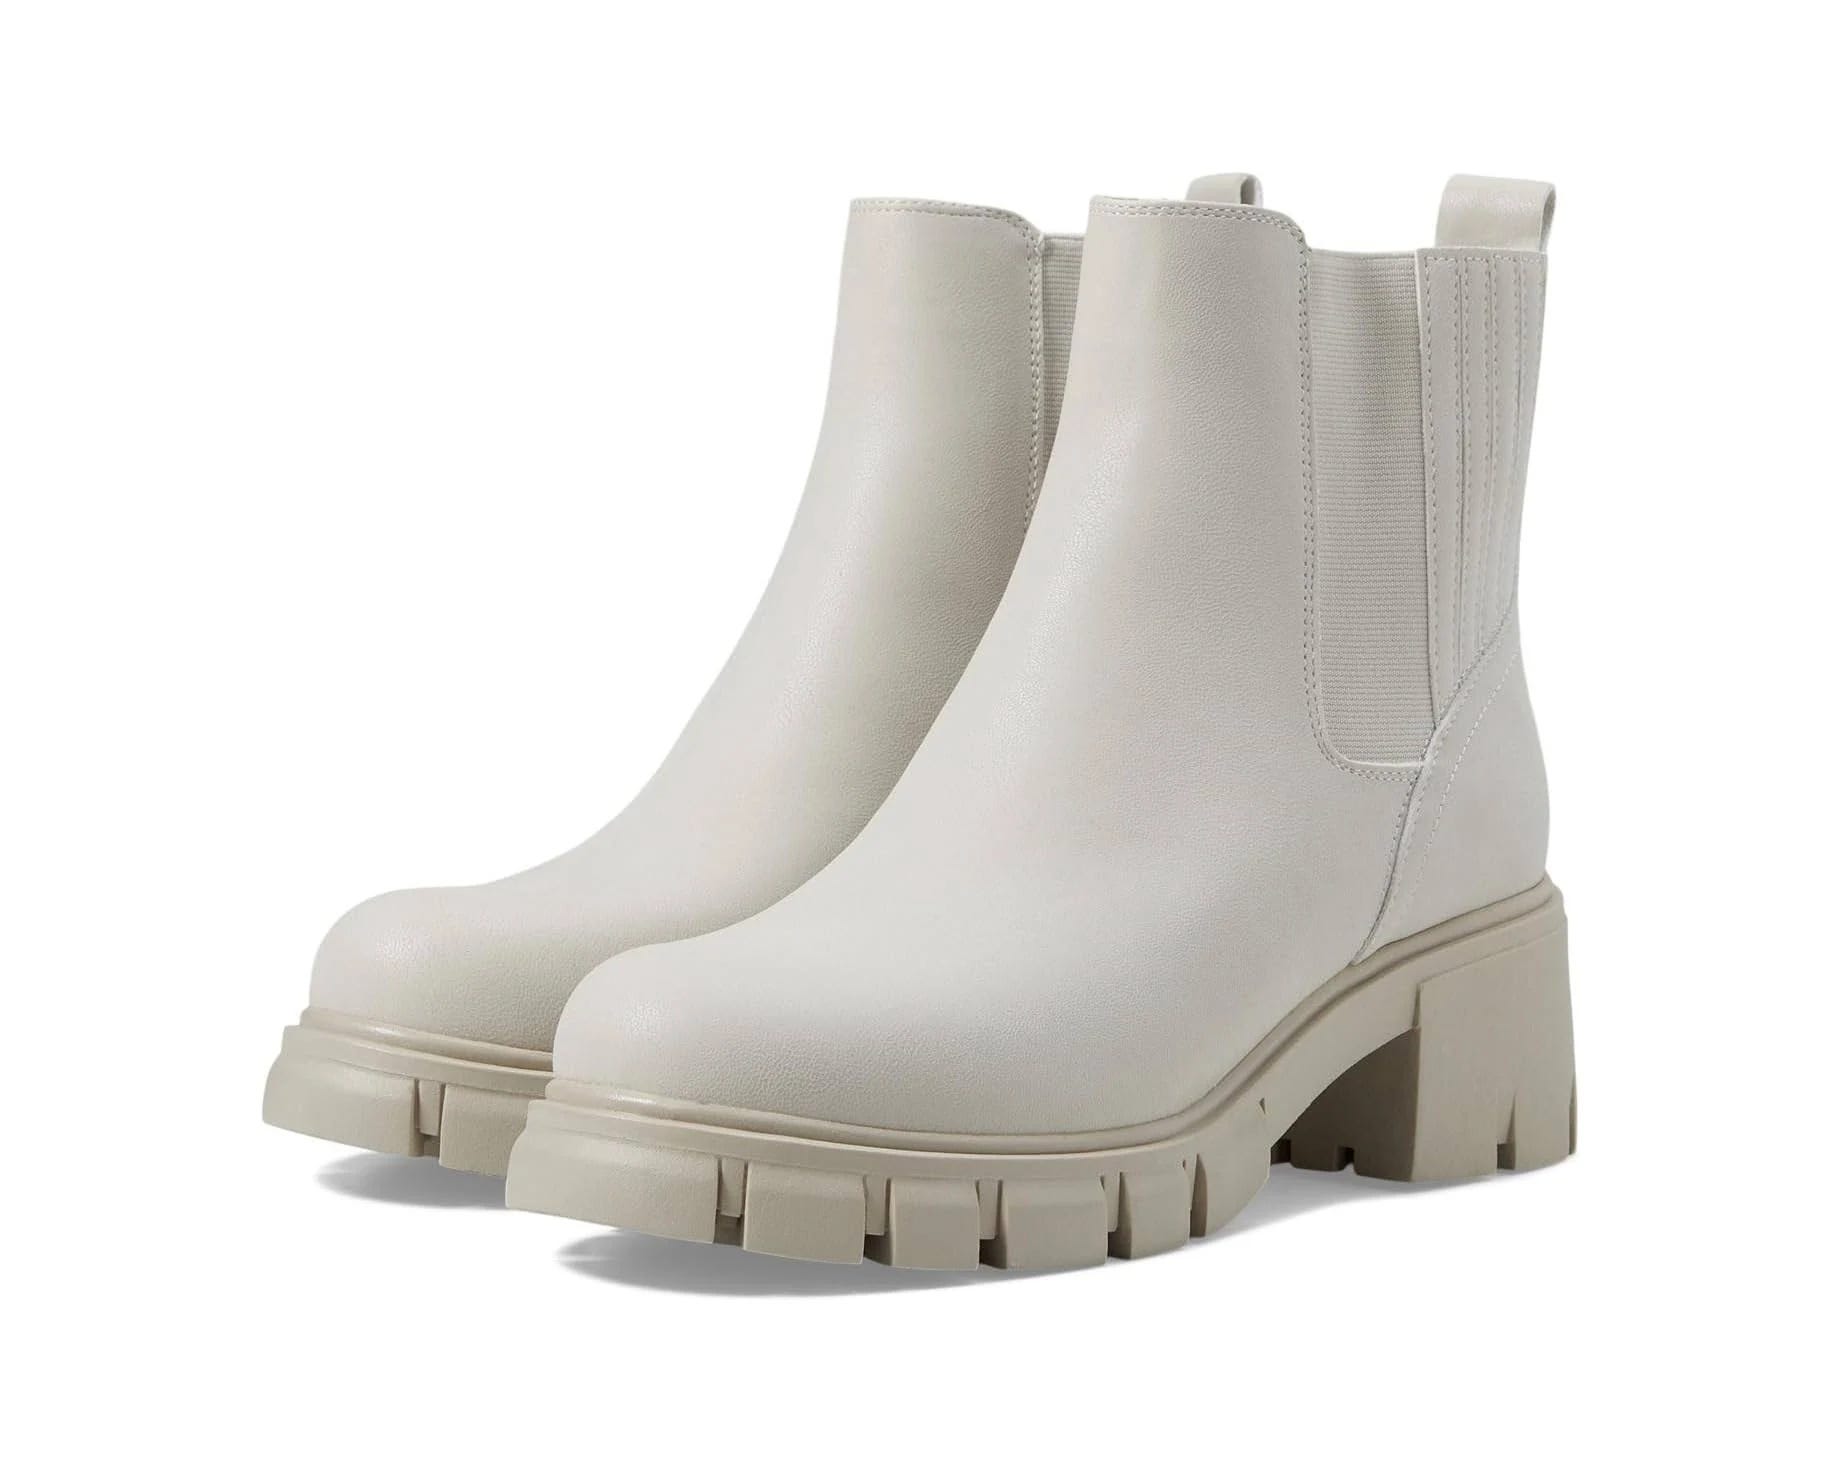 Off-White Chelsea Boot with Stacked Block Heel | Image